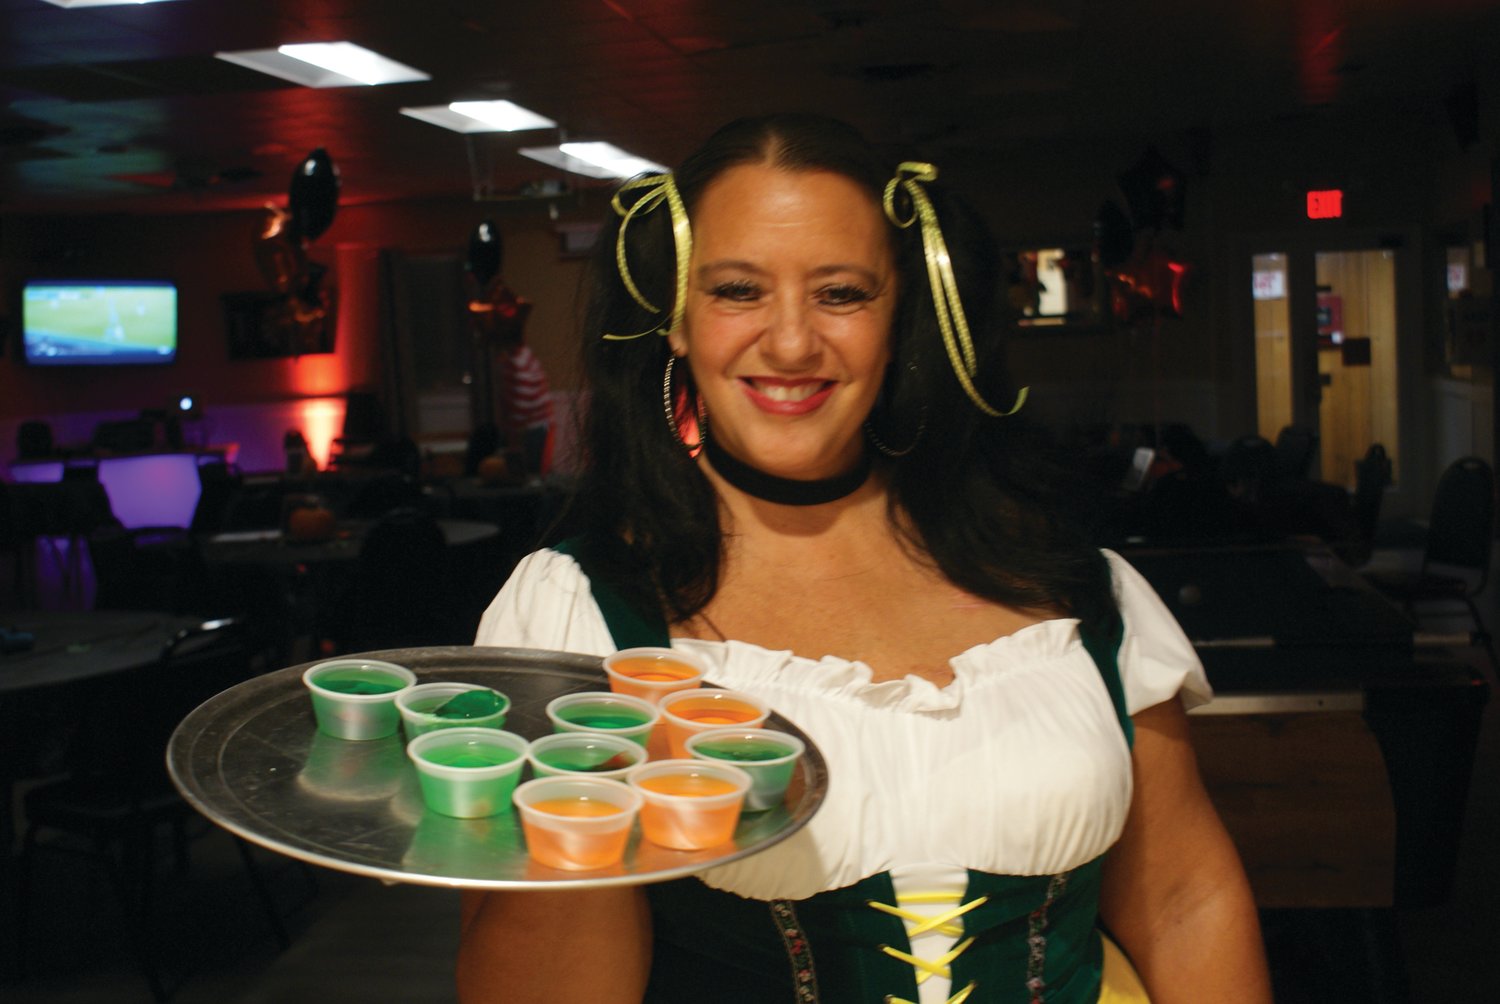 JELL-O SHOTS: Serving up some Jell-O shots at the St. Mary’s Feast Society Halloween Party was Linda Nardolillo, secretary of the Ladies’ Auxiliary.